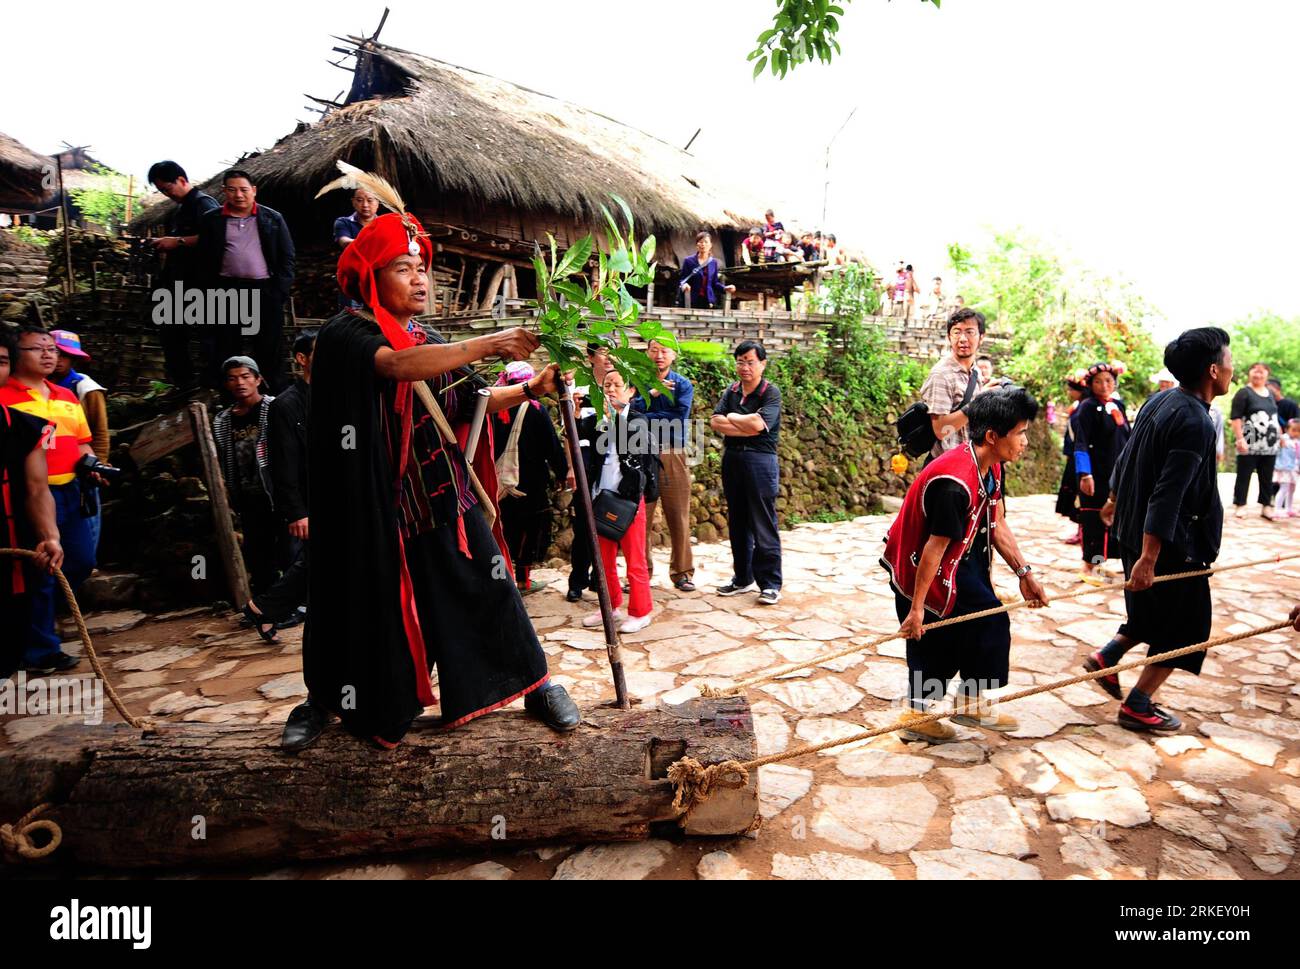 https://c8.alamy.com/comp/2RKEY0H/bildnummer-55312402-datum-03052011-copyright-imagoxinhua-cangyuan-may-3-2011-xinhua-local-va-ethnic-hold-their-traditional-sacrifice-rite-named-lamugu-in-wengding-village-southwest-china-s-yunnan-province-may-3-2011-wengding-has-been-well-reserved-in-terms-of-its-unique-va-culture-and-folk-custom-after-years-of-development-in-tourism-the-small-village-has-grown-up-to-a-pop-scenery-spot-in-yunnan-xinhuaqin-qing-hdt-china-yunnan-va-ethnic-group-village-tourism-cn-publicationxnotxinxchn-gesellschaft-fotostory-minderheit-va-kbdig-xcb-2011-quer-o0-ritual-tradition-bi-2RKEY0H.jpg